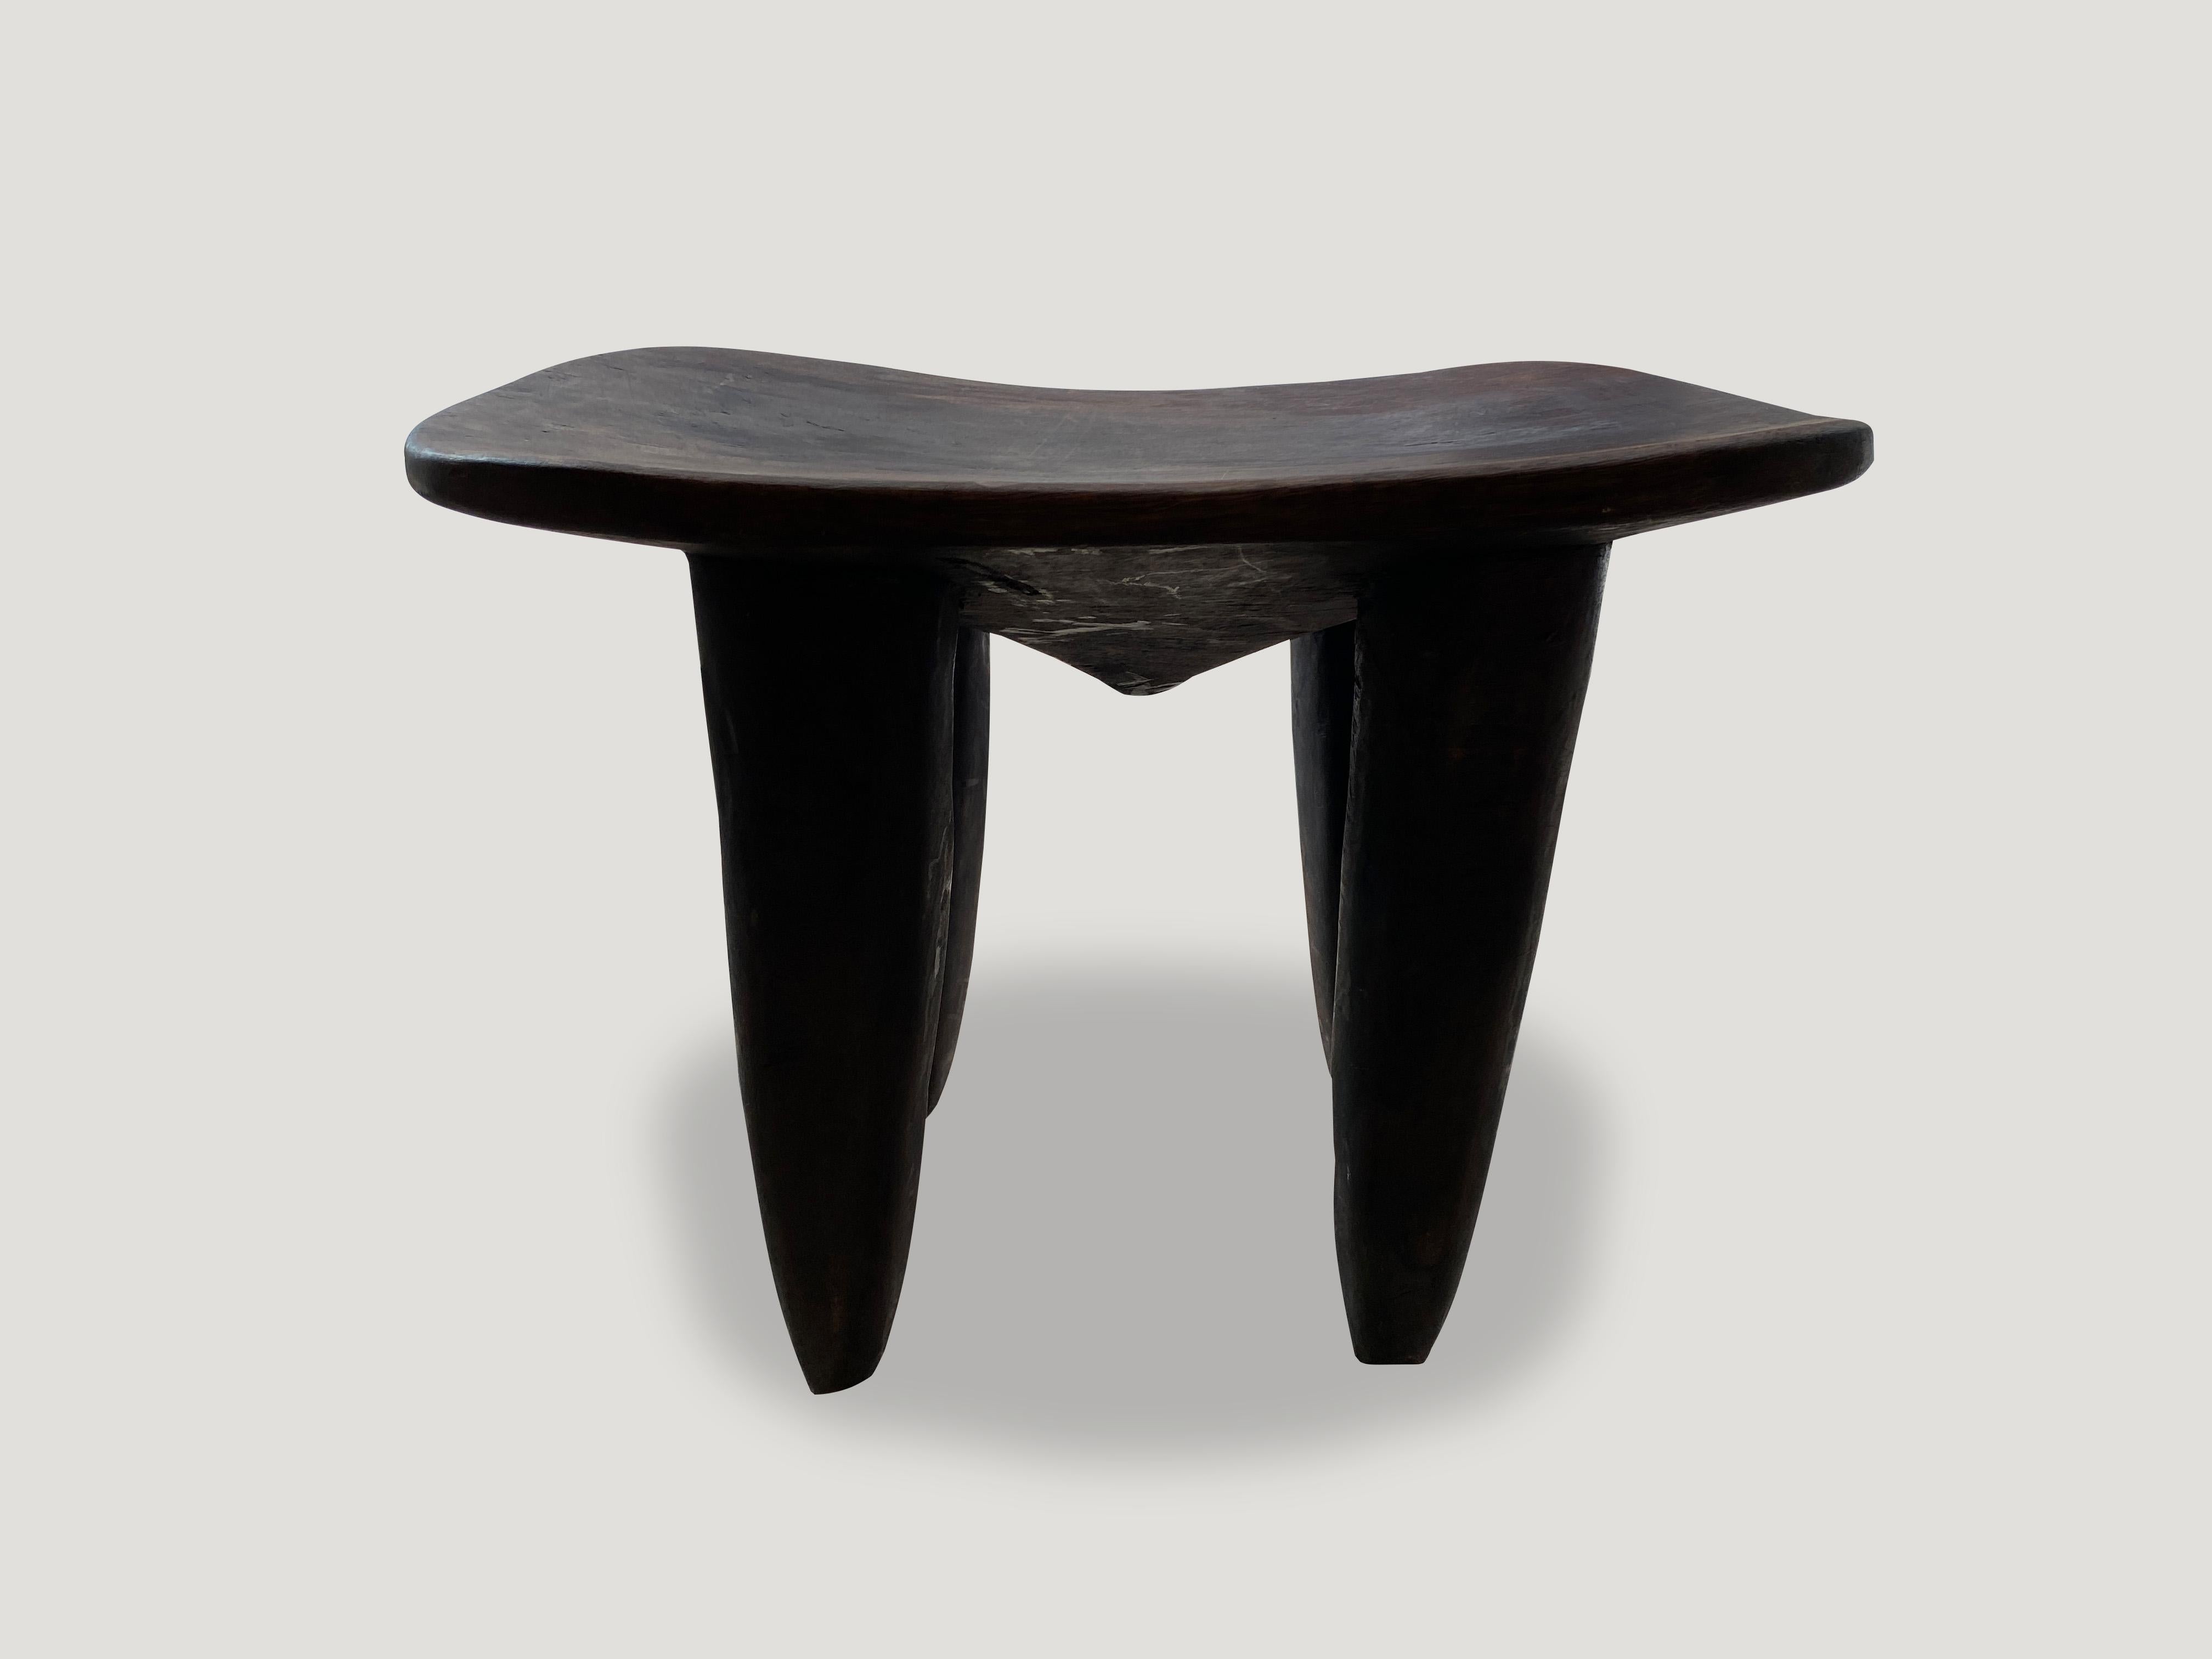 Wood Andrianna Shamaris Senufo Stool or Bench from Cote d'Ivoire